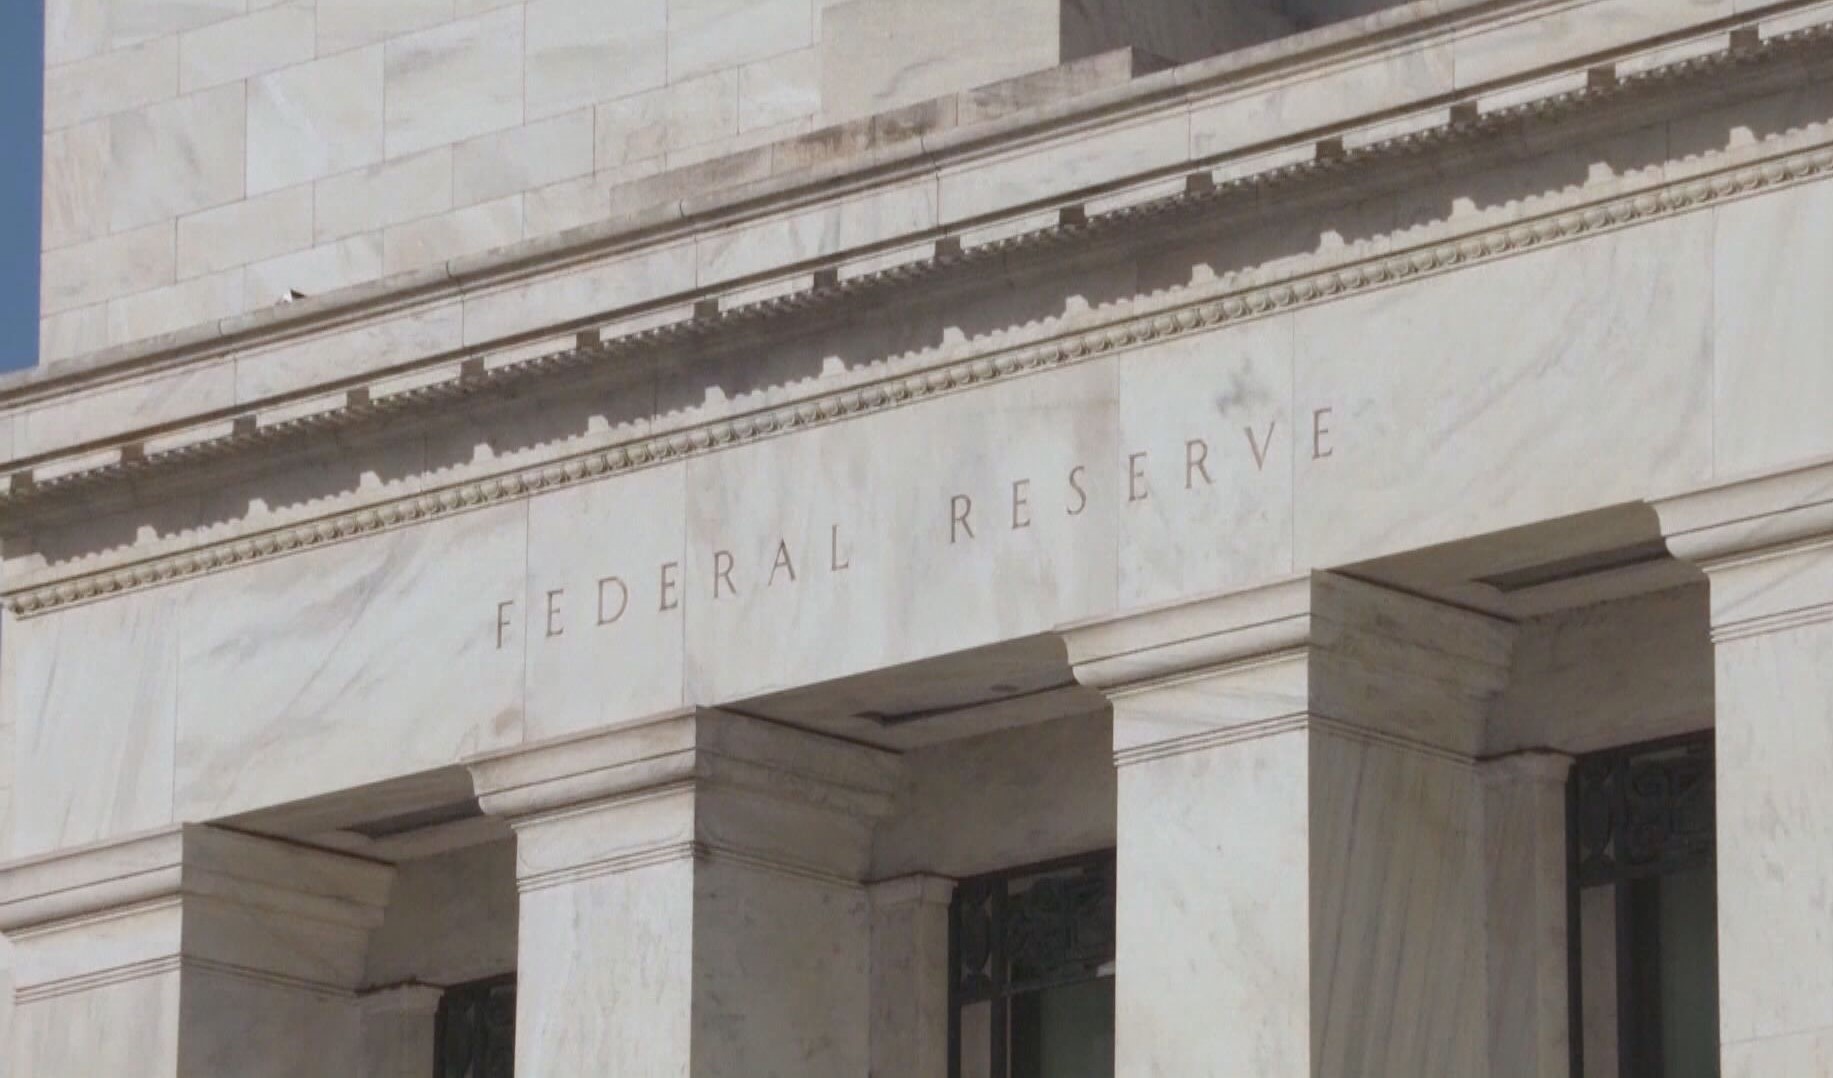 Federal Reverve in US and its policies will affect trading environment